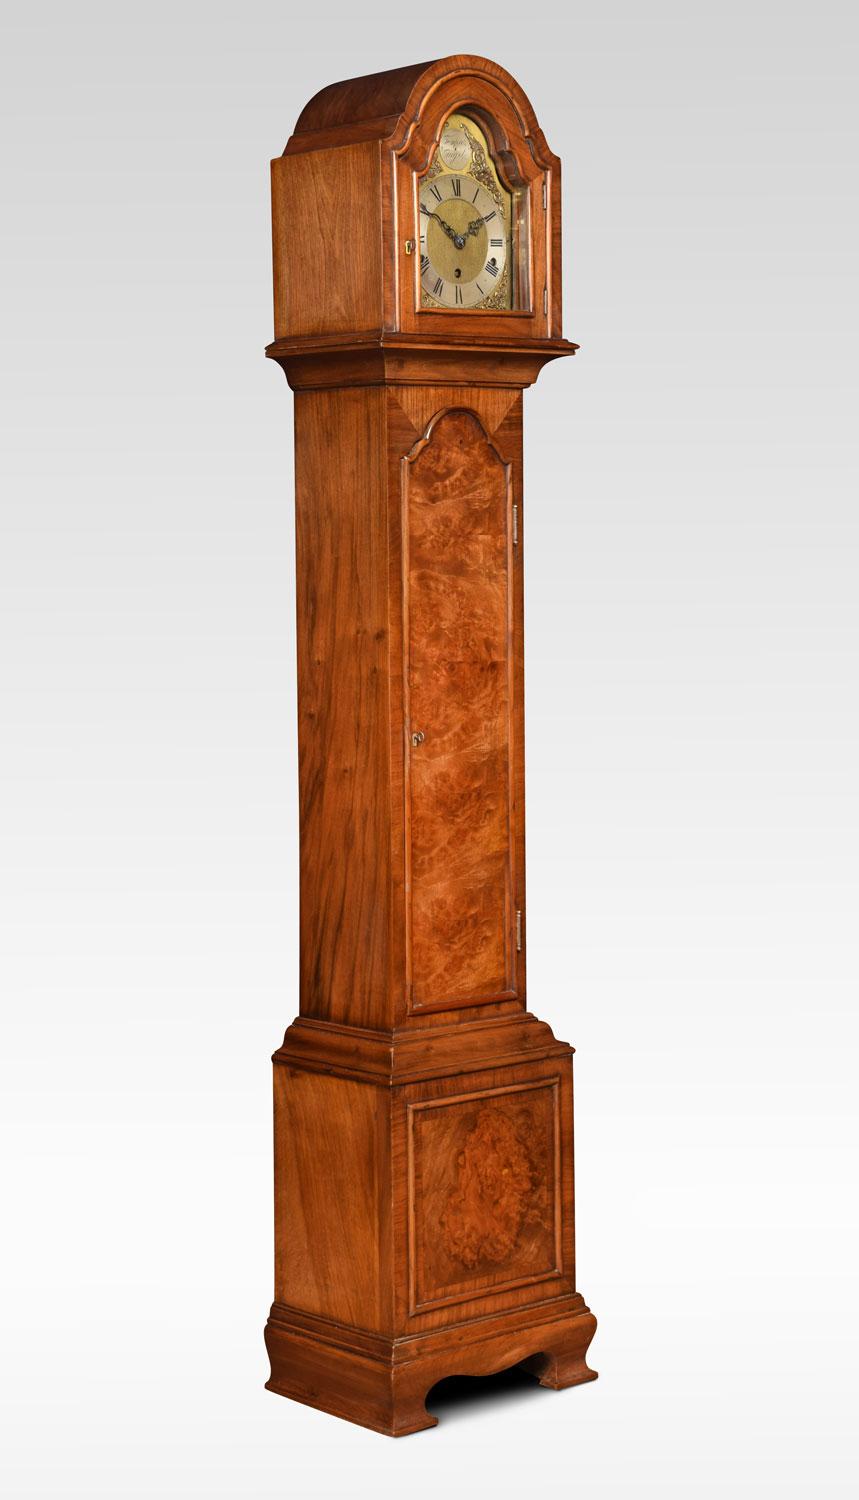 Walnut cased grandmother clock, the arched hood to the brass dial engraved with gilt-metal Roman numerals and decorated foliated face, with chime/silent leaver. The eight day spring driven movement chiming on gongs. The walnut case with long